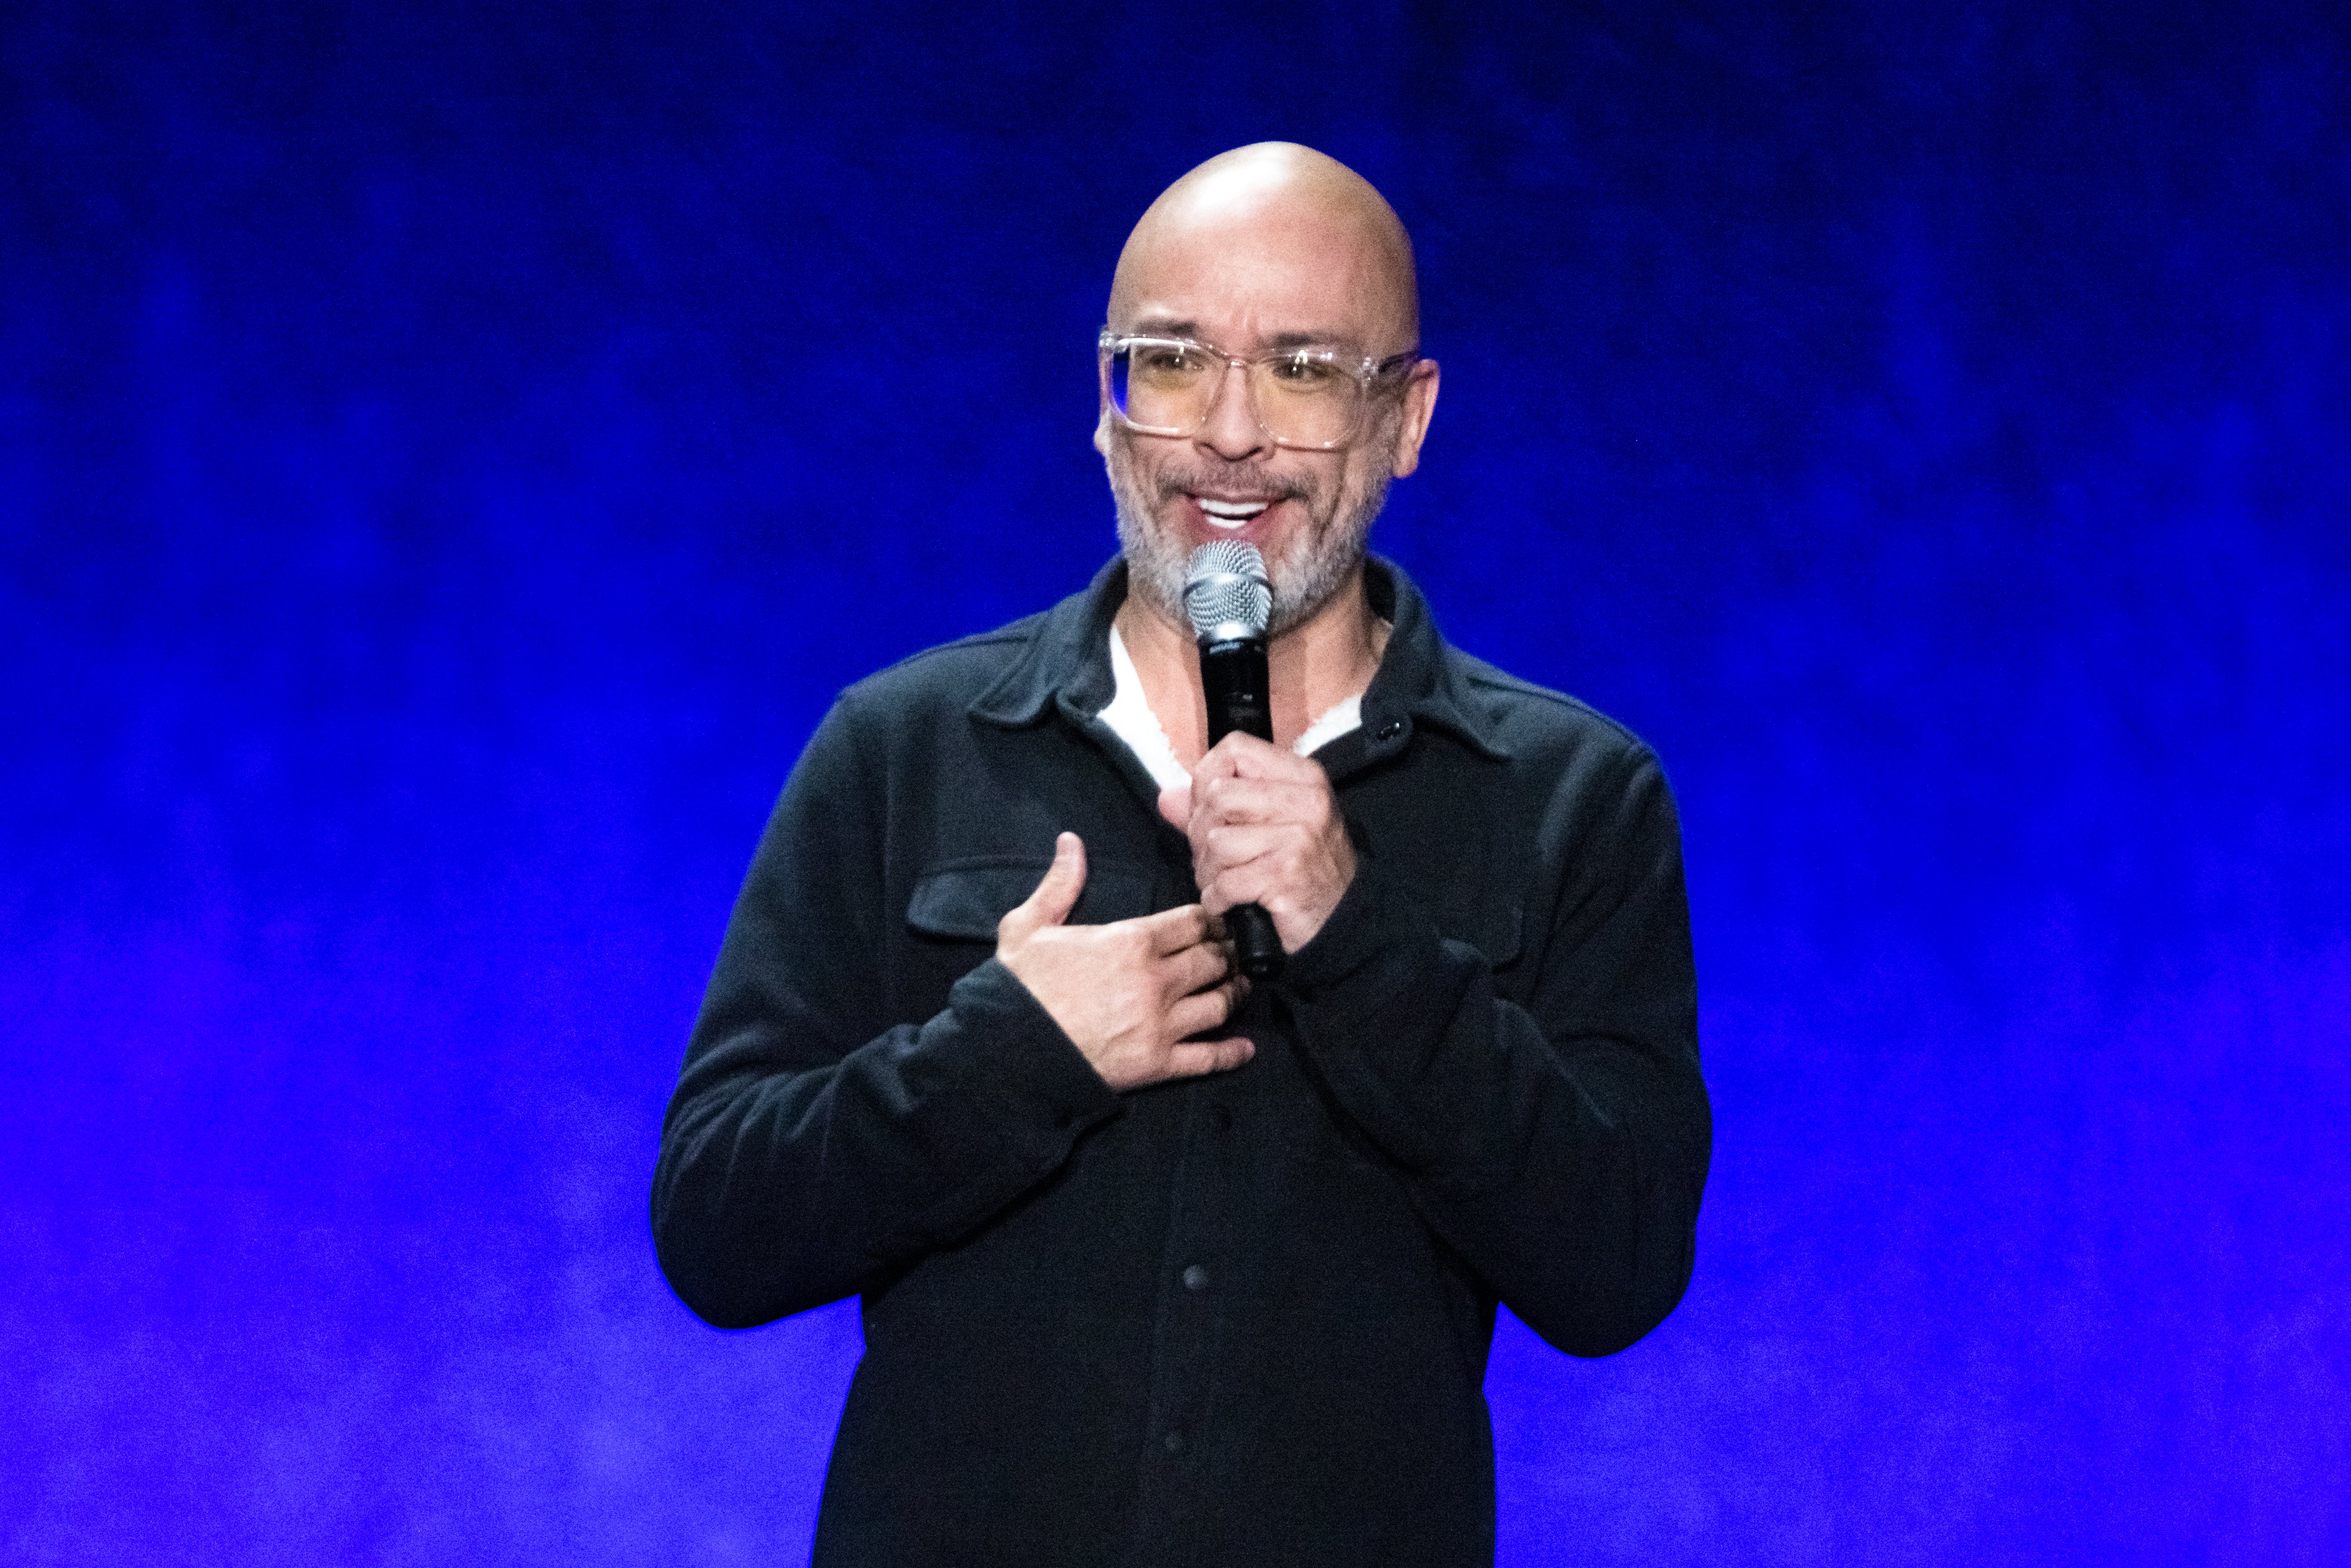 Jo Koy on April 27, 2022 in Las Vegas, Nevada | Source: Getty Images